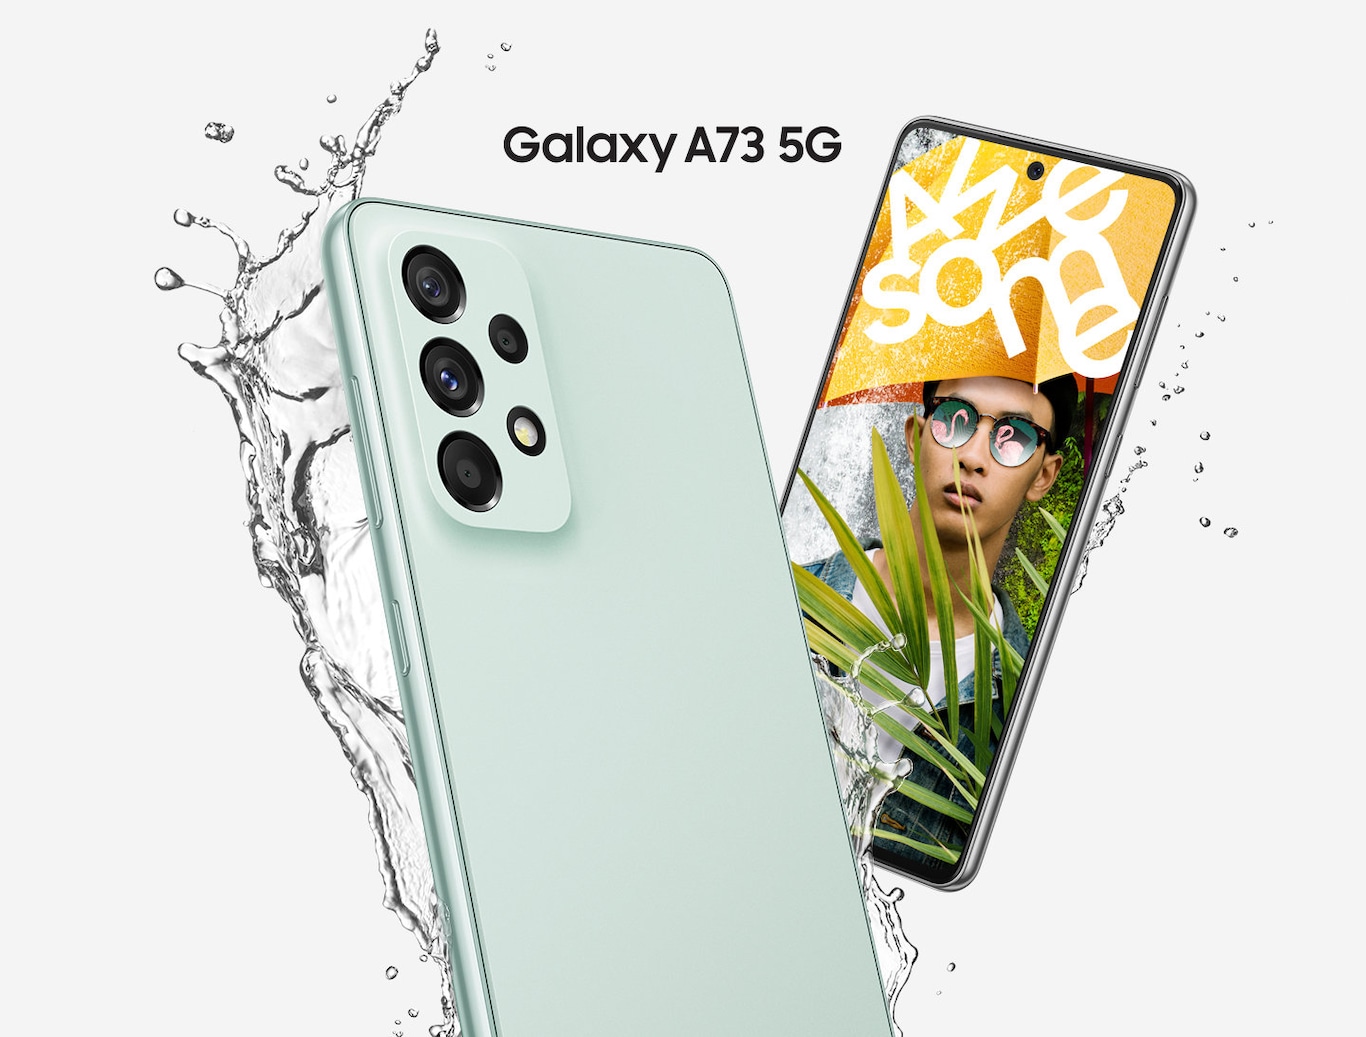 Read the user and expert reviews on Samsung A73 5G today. Two Galaxy A73 5G devices, in Awesome Mint, showing the back and front sides. Water is being splashed to display the water-resistance while the front-siding device shows a man wearing a yellow umbrella that has Awesome written in white text.